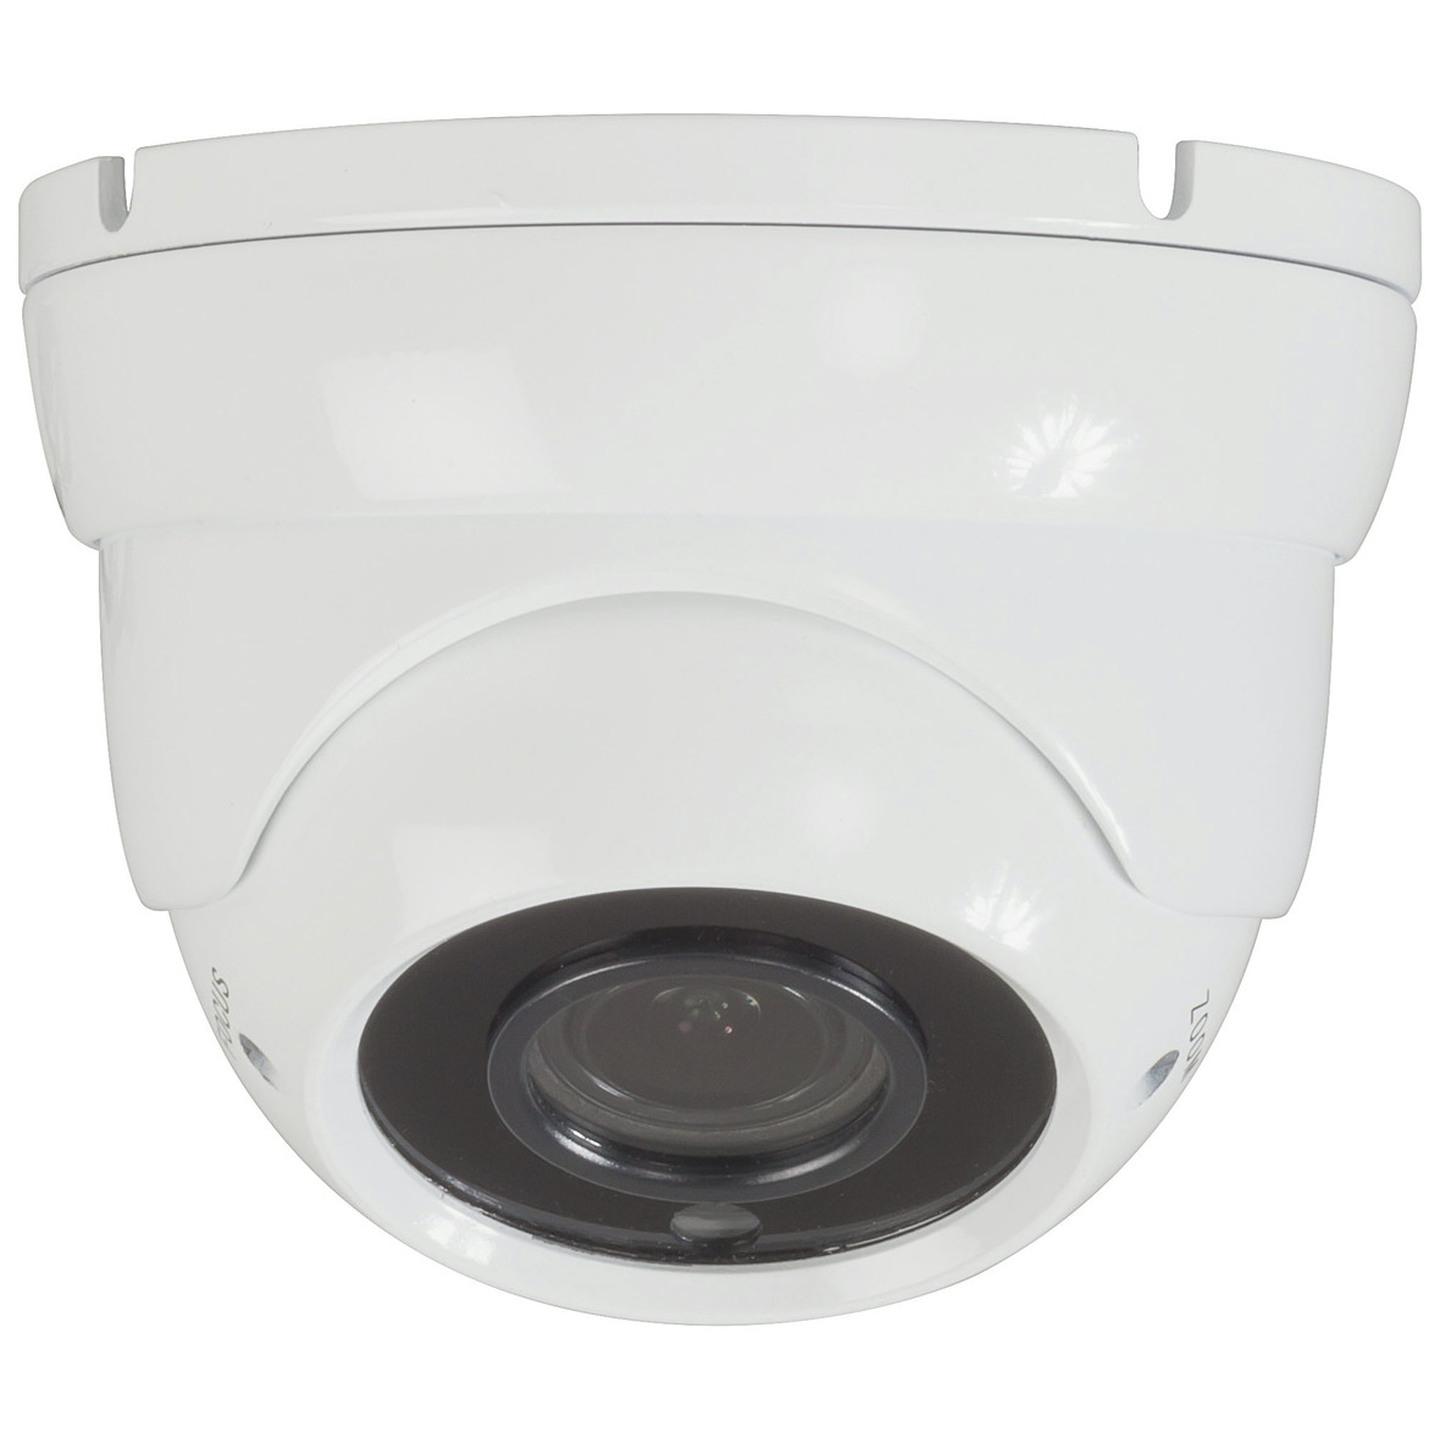 1080p AHD Starlight Dome Camera with Infrared LEDs